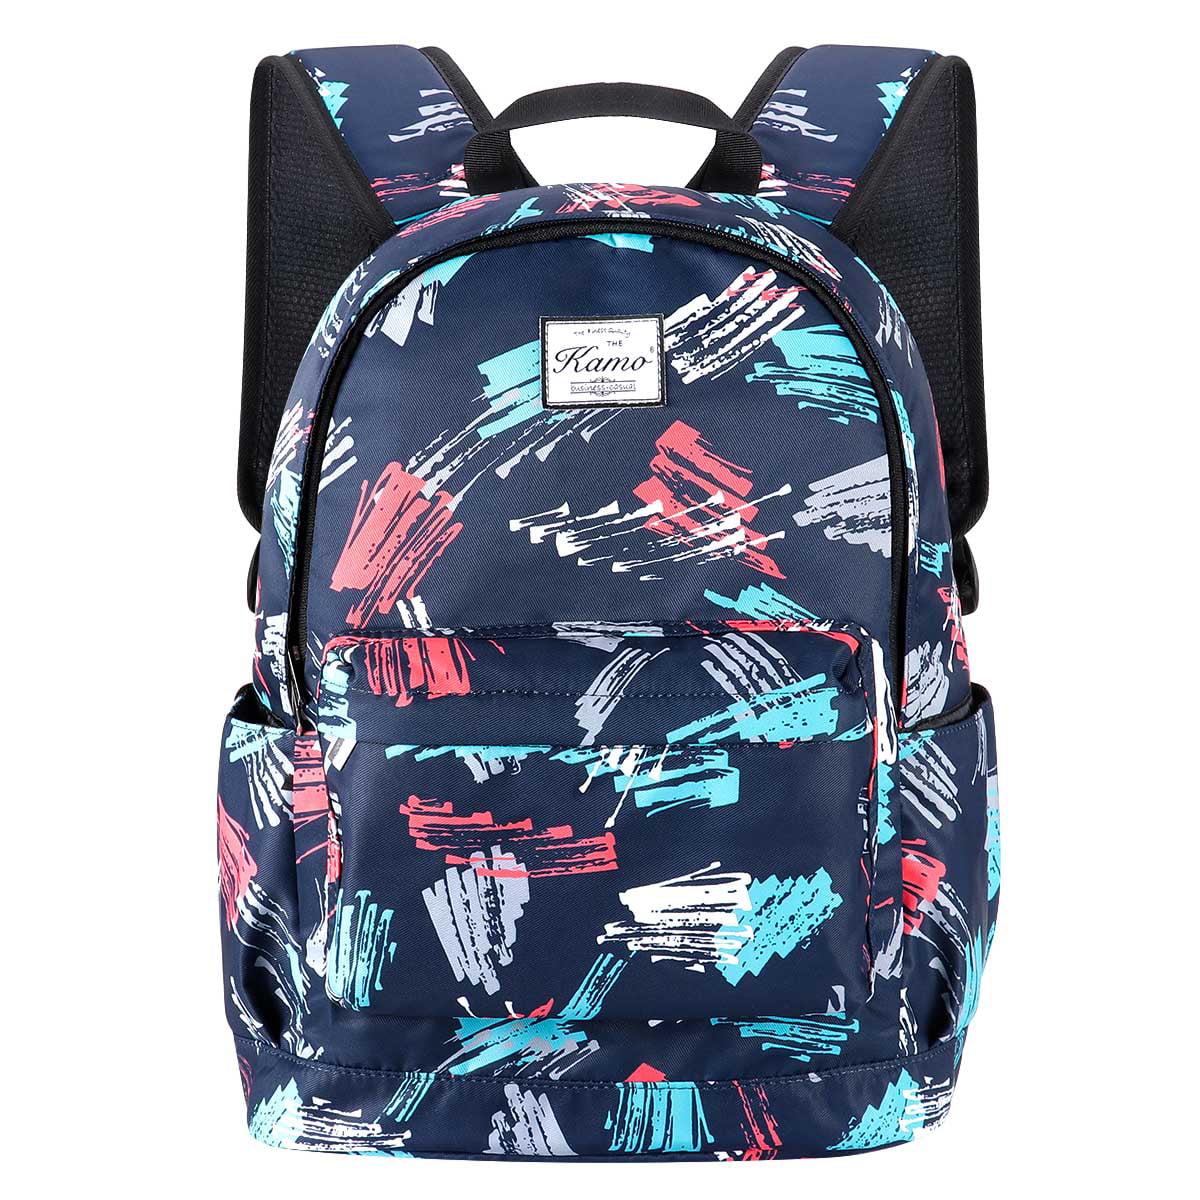 Kawell - Backpack for Girls - Fashion Floral Schoolbag College Student